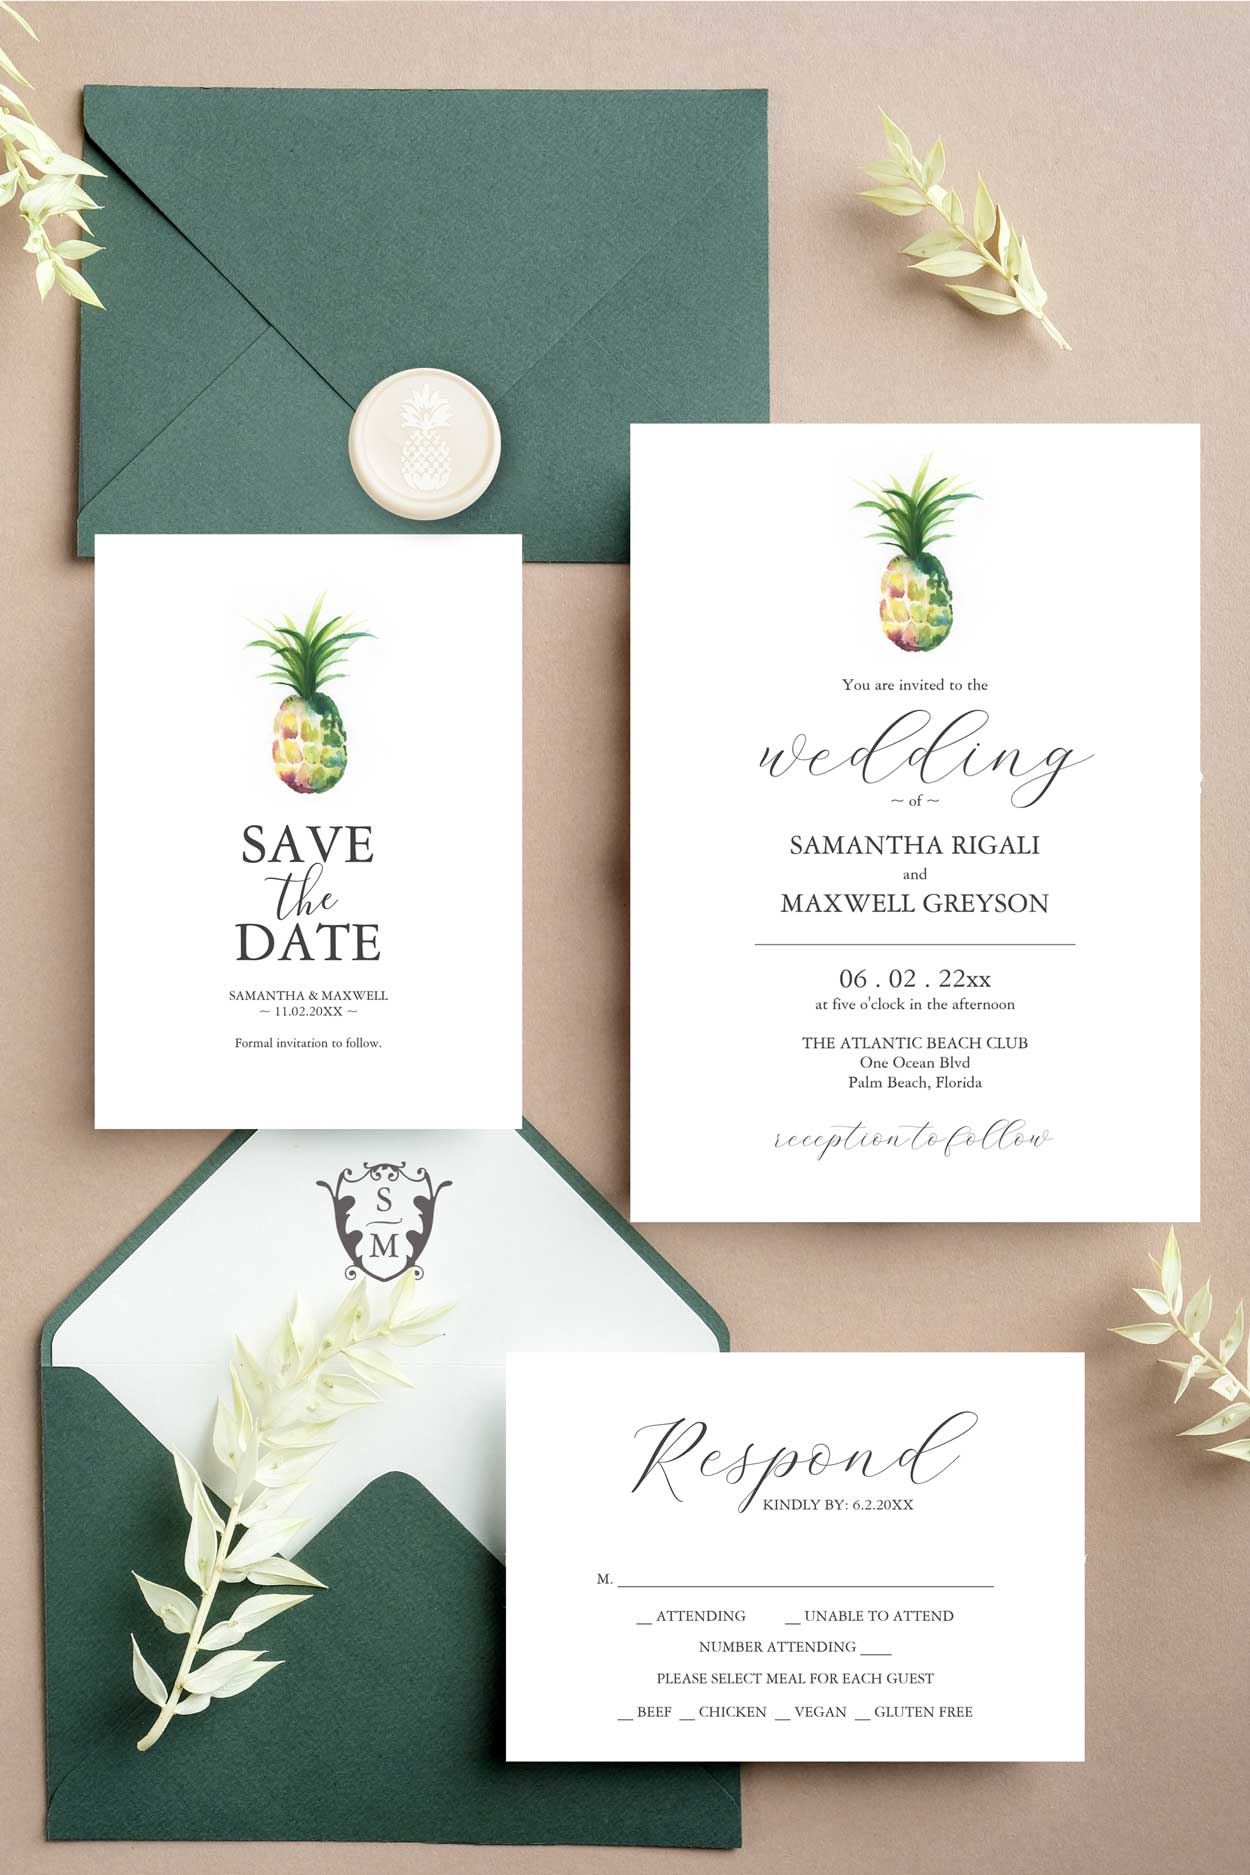 destination wedding invitations feature watercolor pineapple art by Victoria Grigaliunas. Perfect for Florida weddings or any tropical location